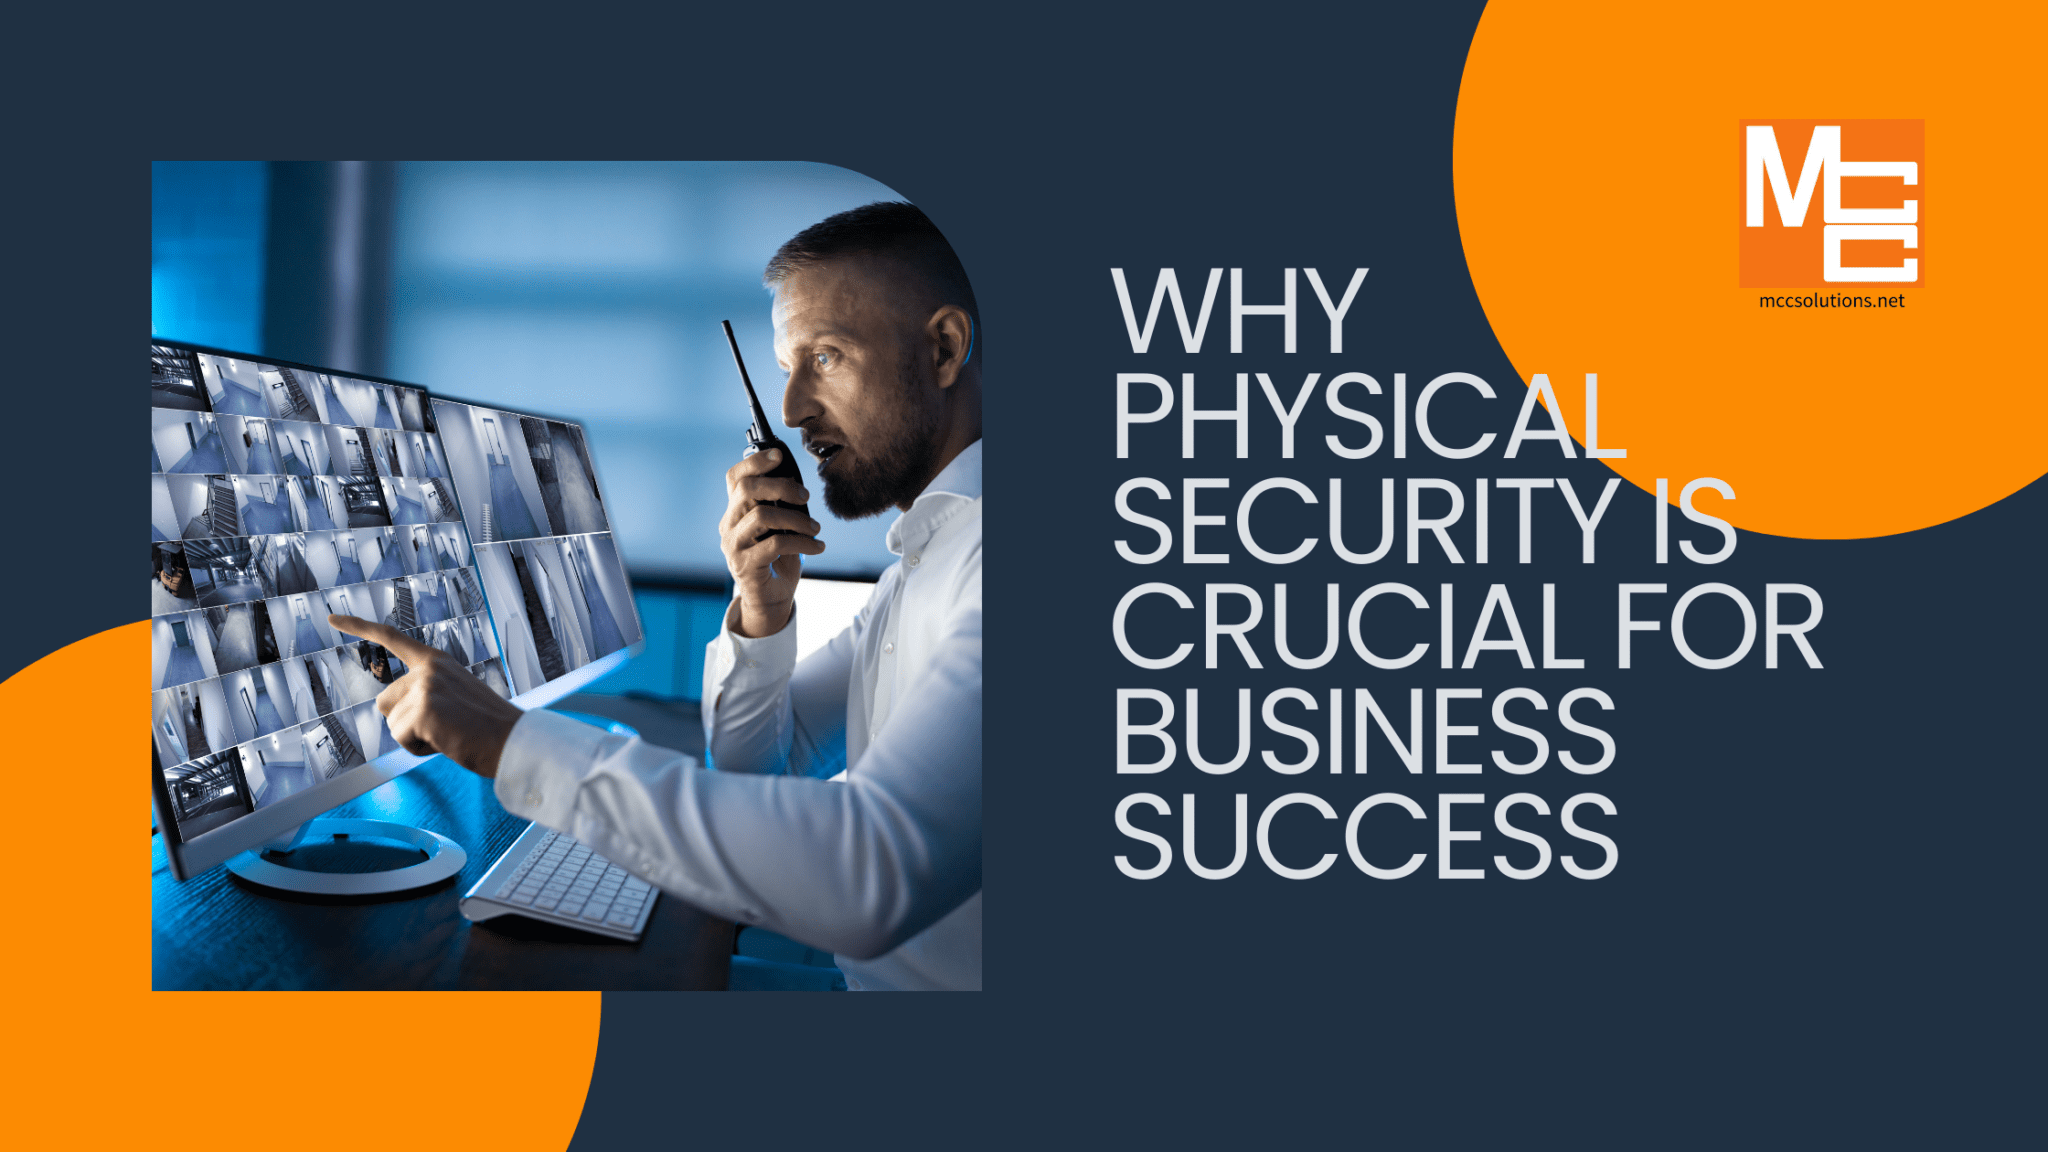 Why Physical Security is Crucial for Business Success